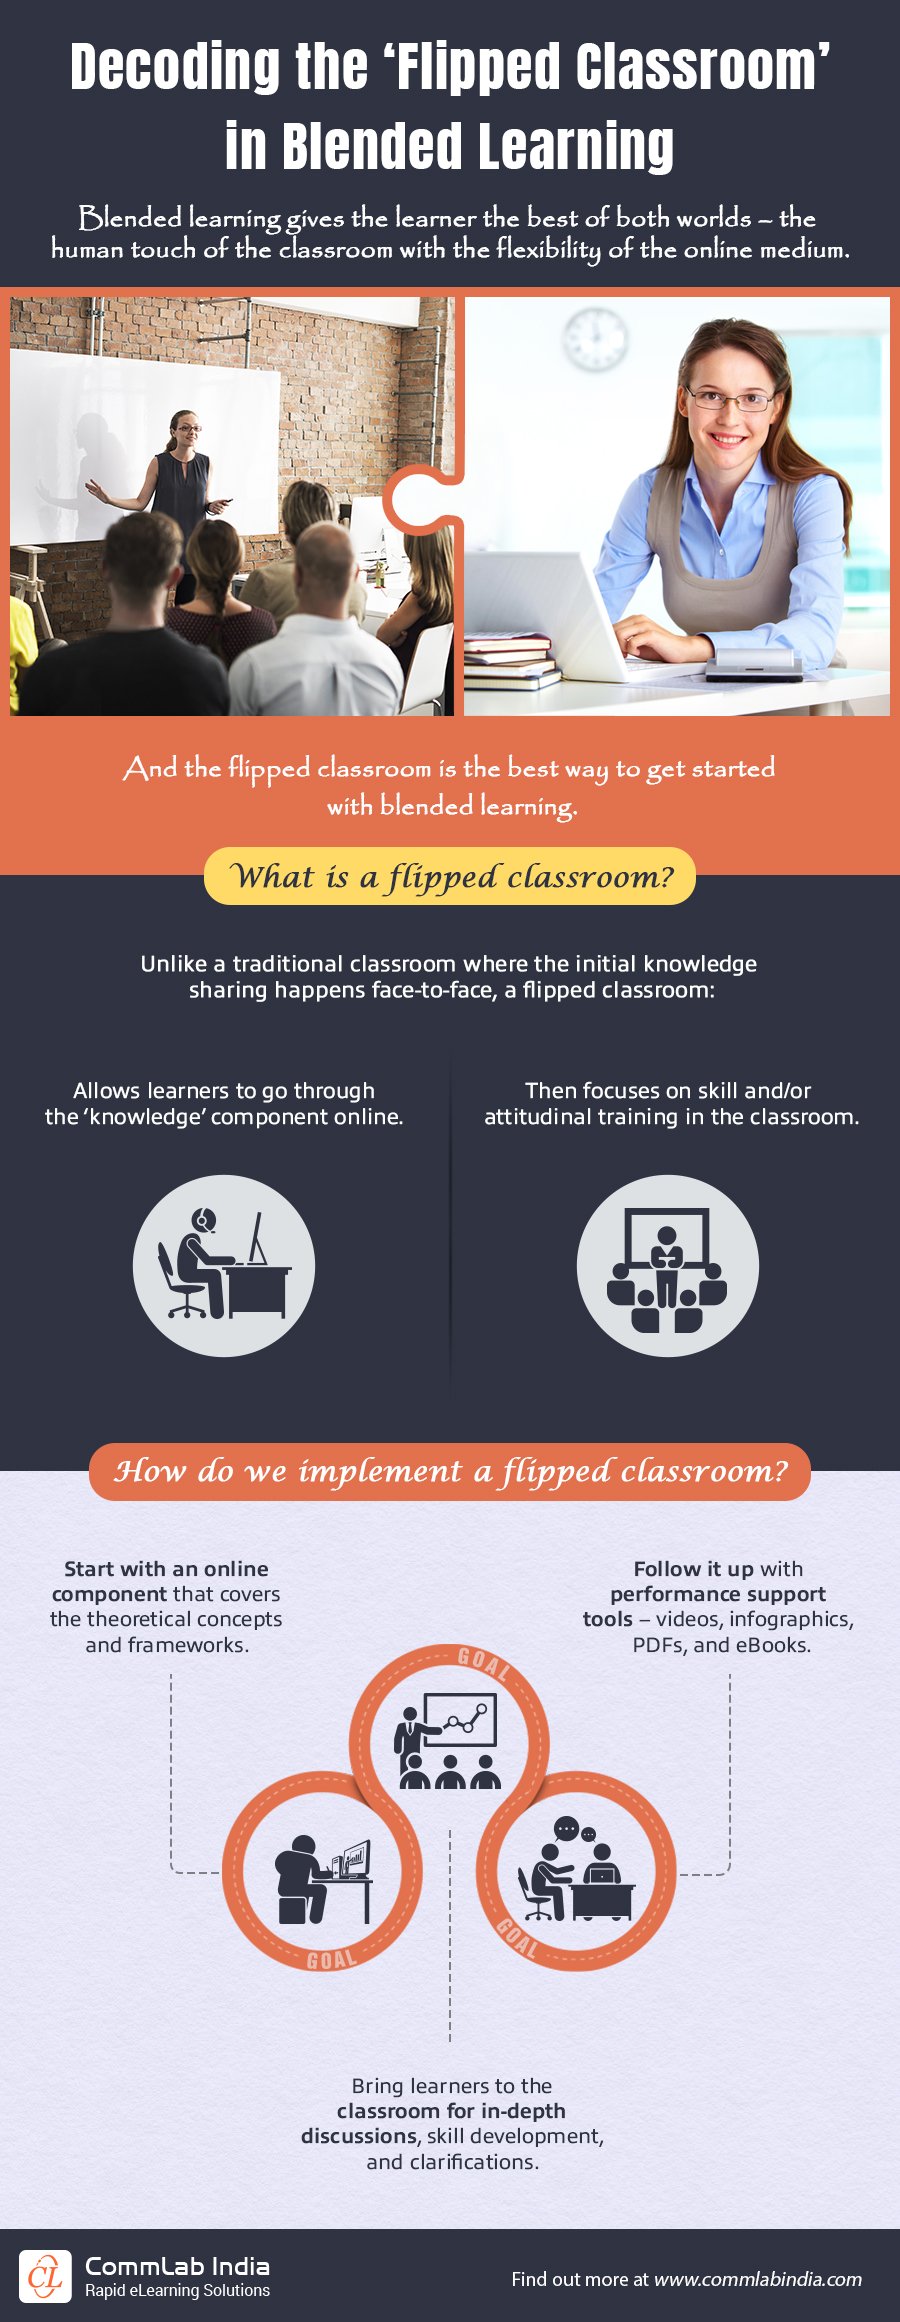 Blended Learning and the Use of a Flipped Classroom Decoded